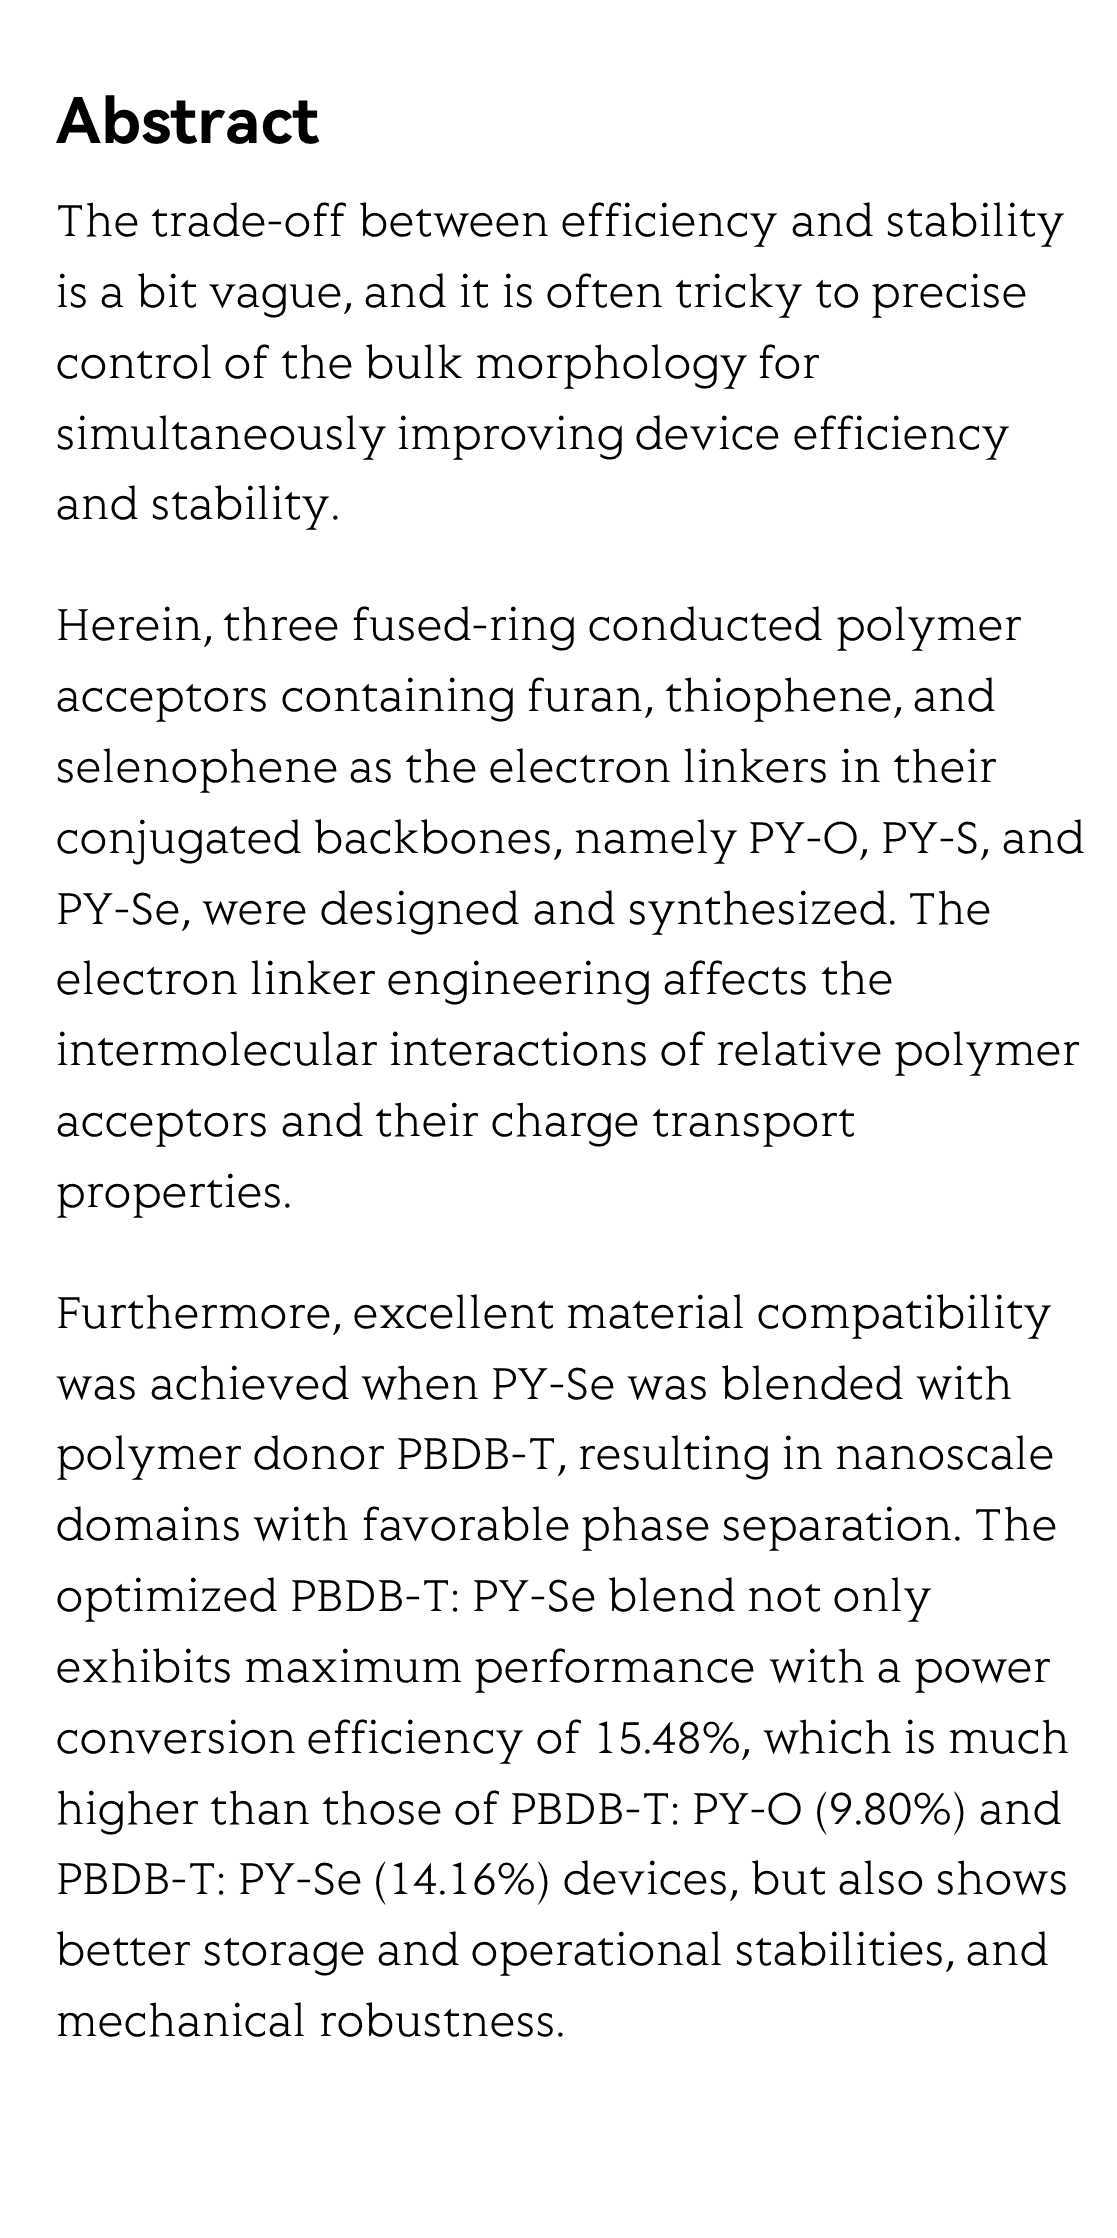 Tailoring polymer acceptors by electron linkers for achieving efficient and stable all-polymer solar cells_2